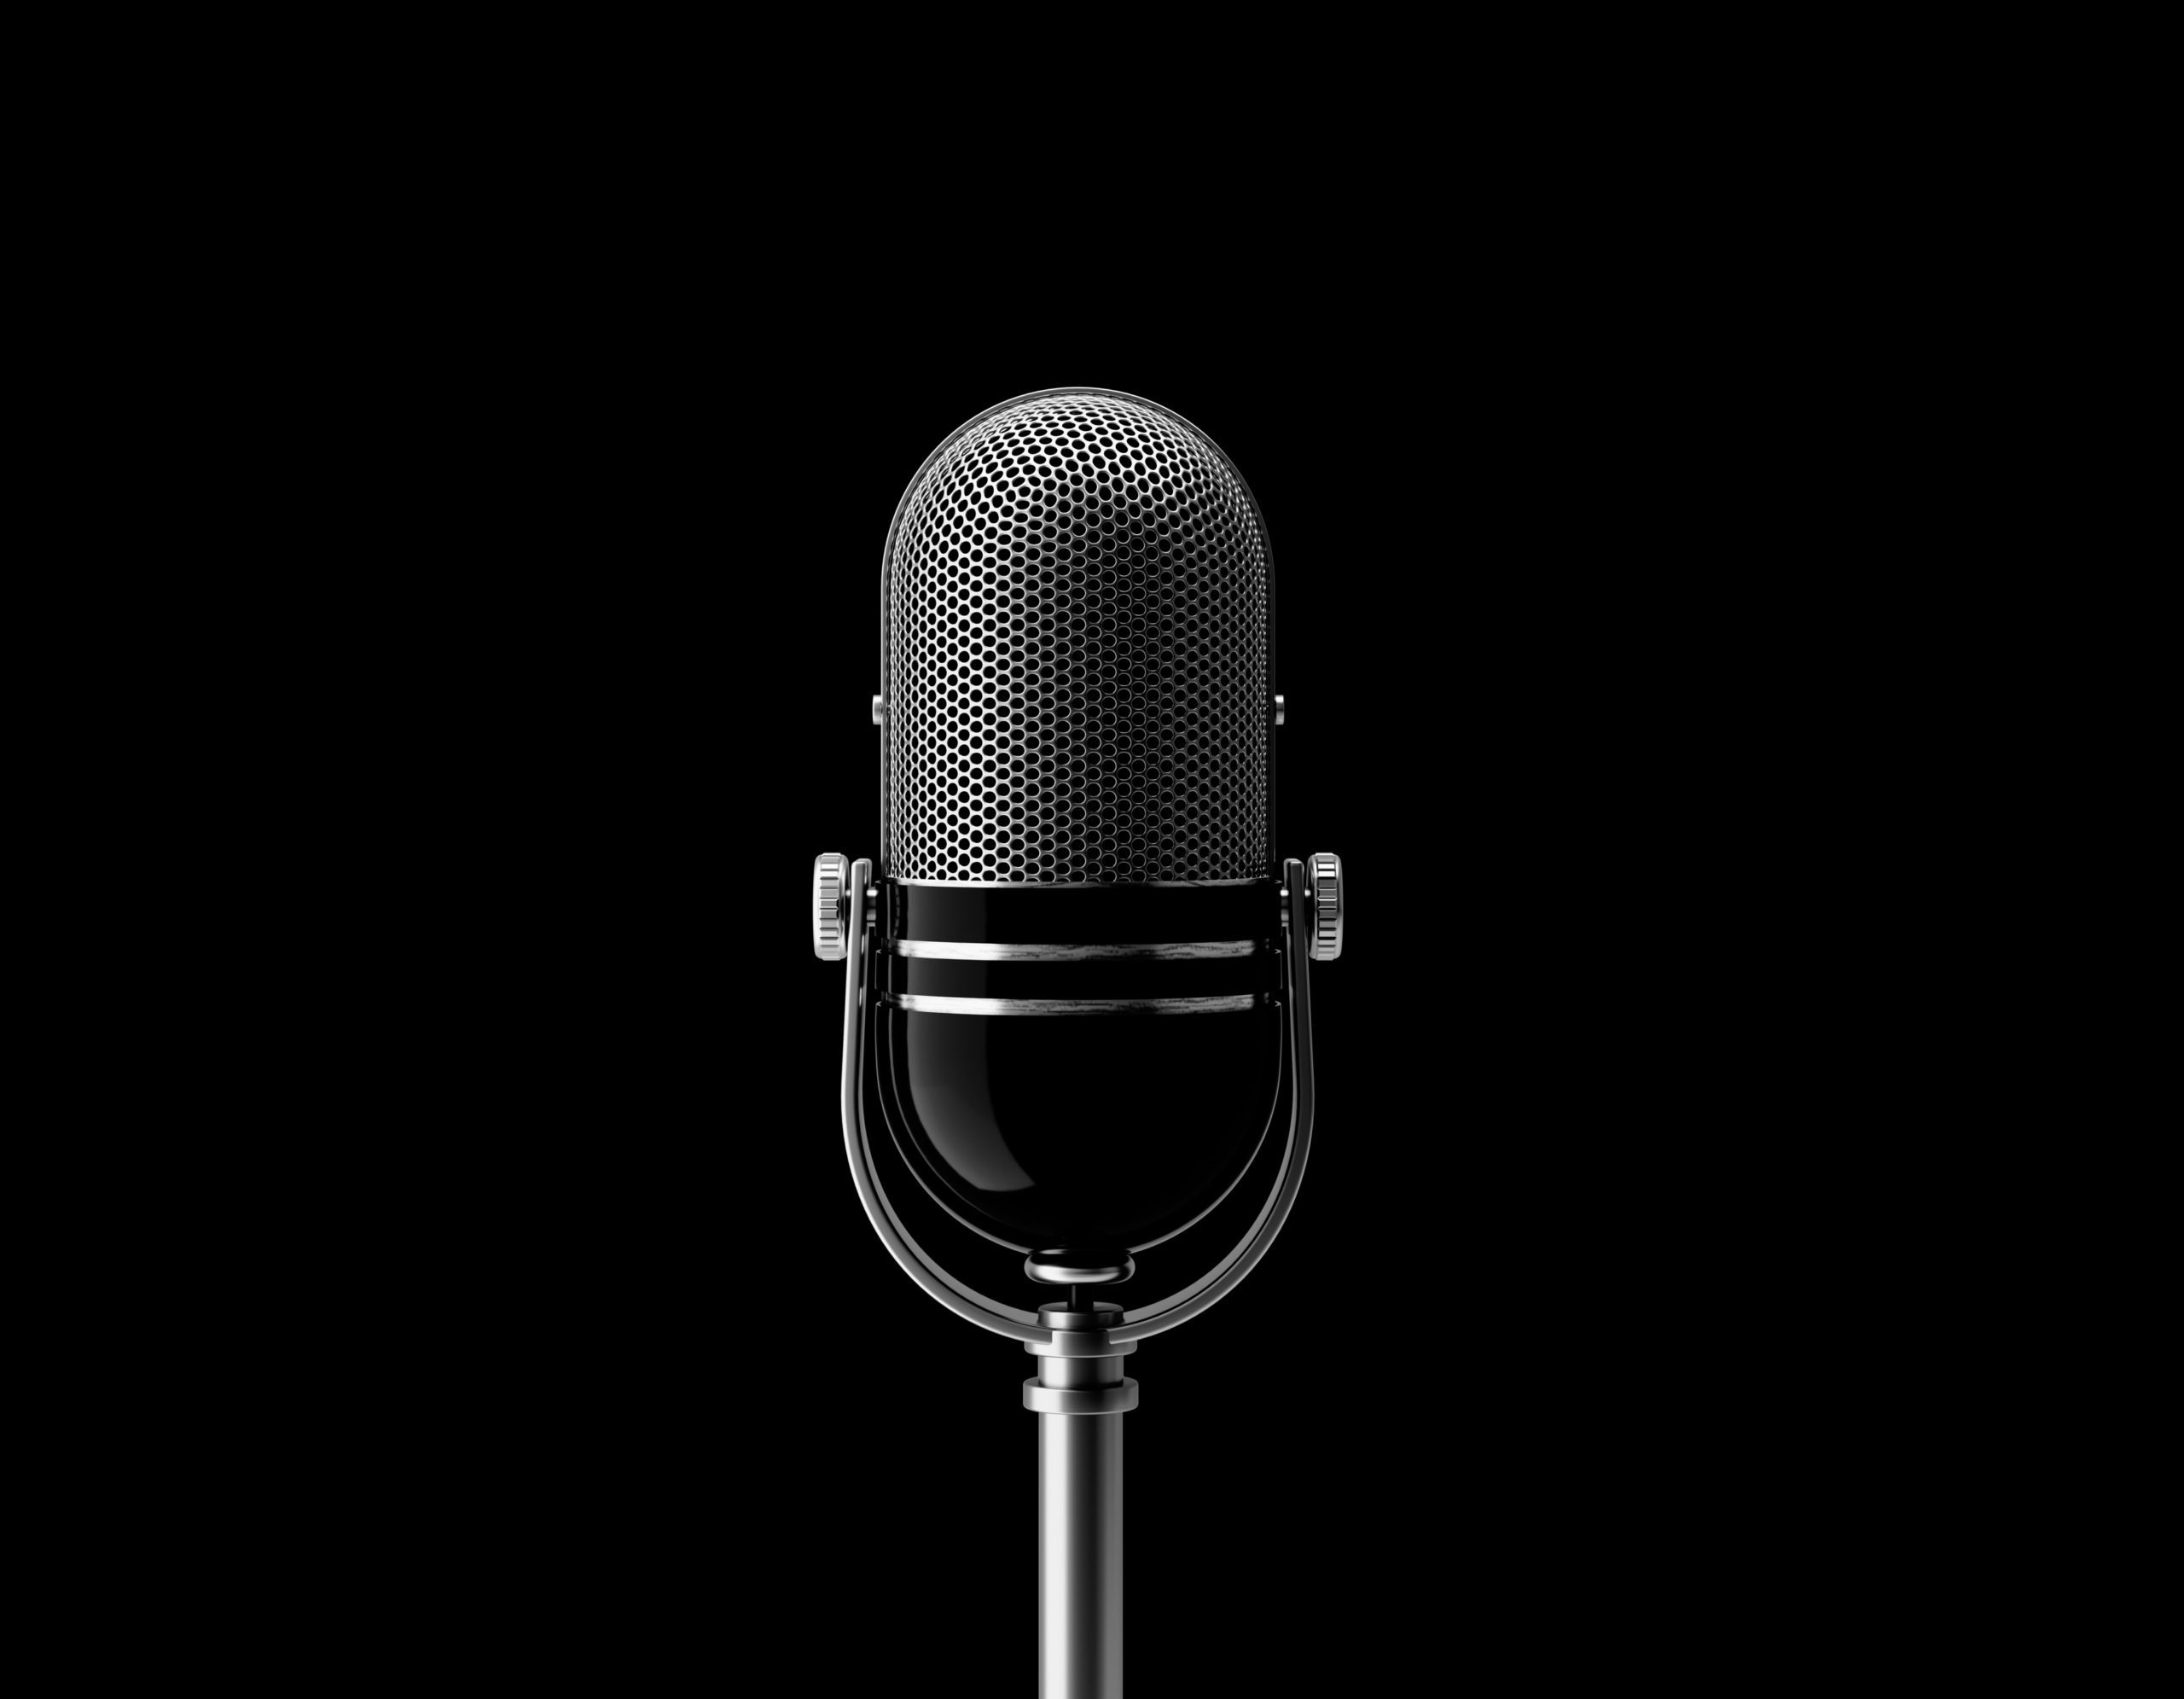 Microphone on black background. Horizontal composition with copy space. Clipping path is included.